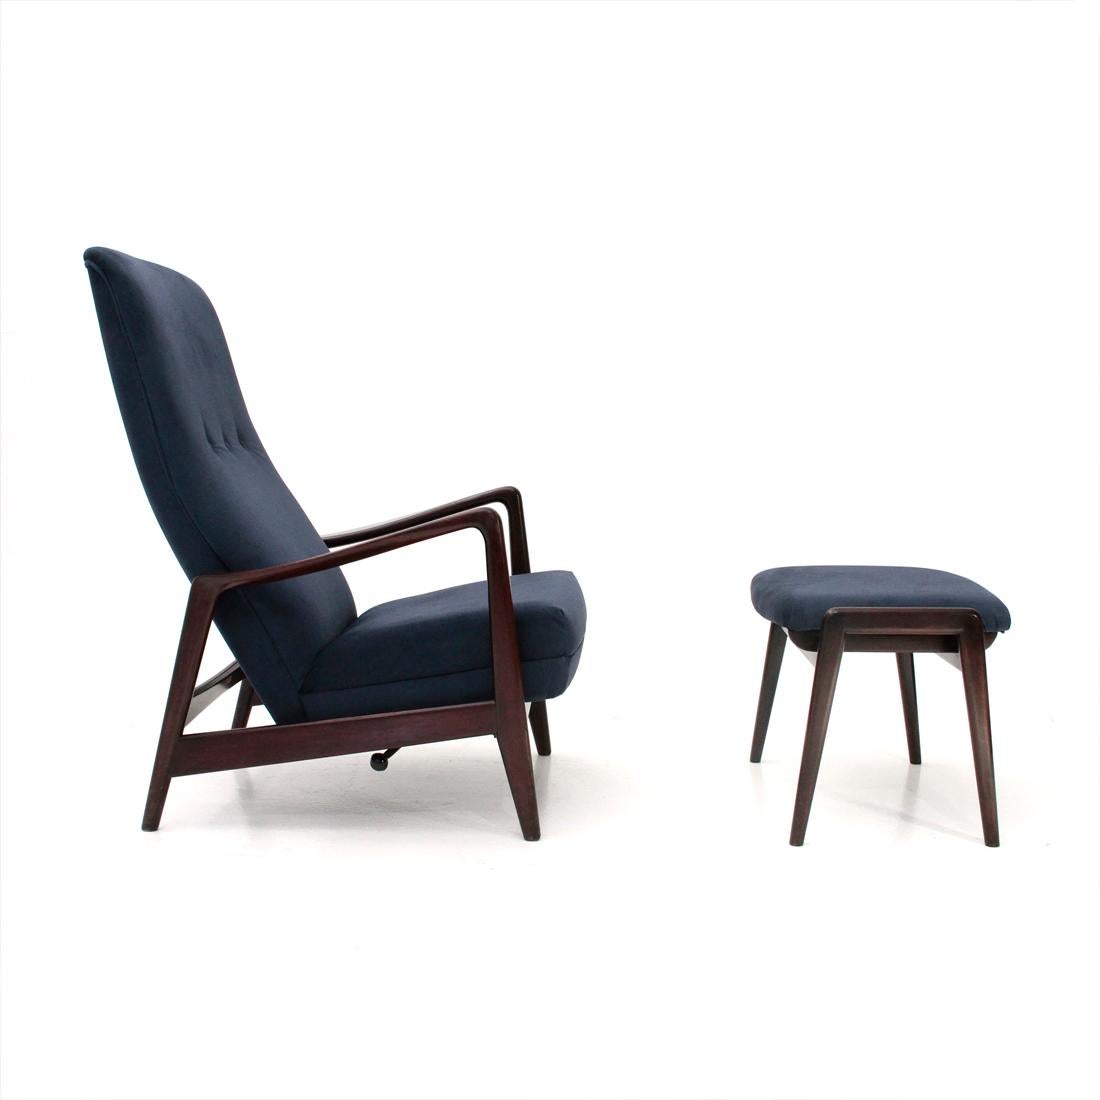 Armchair produced by Cassina of Meda in the 1960s on a project by Adolf Relling and Rolf Rastad.
Structure in shaped solid wood.
Seat and back padded and lined with new blue fabric.
Lever to recline the seat of the chair.
Pouf in solid wood and